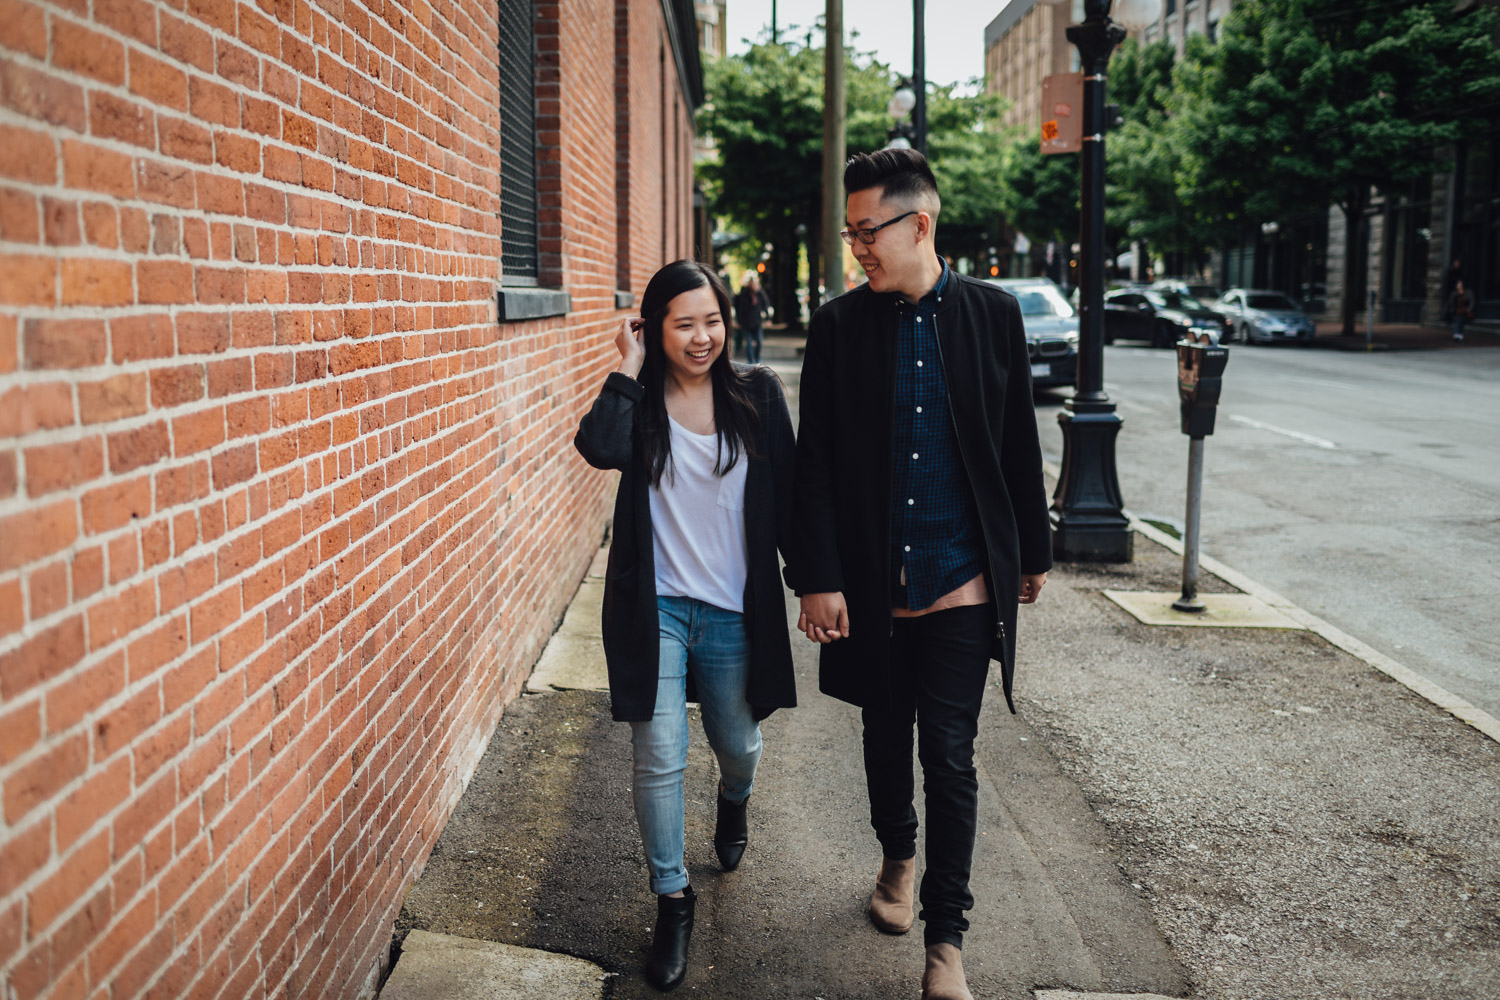 vancouver engagement photography in gastown bc